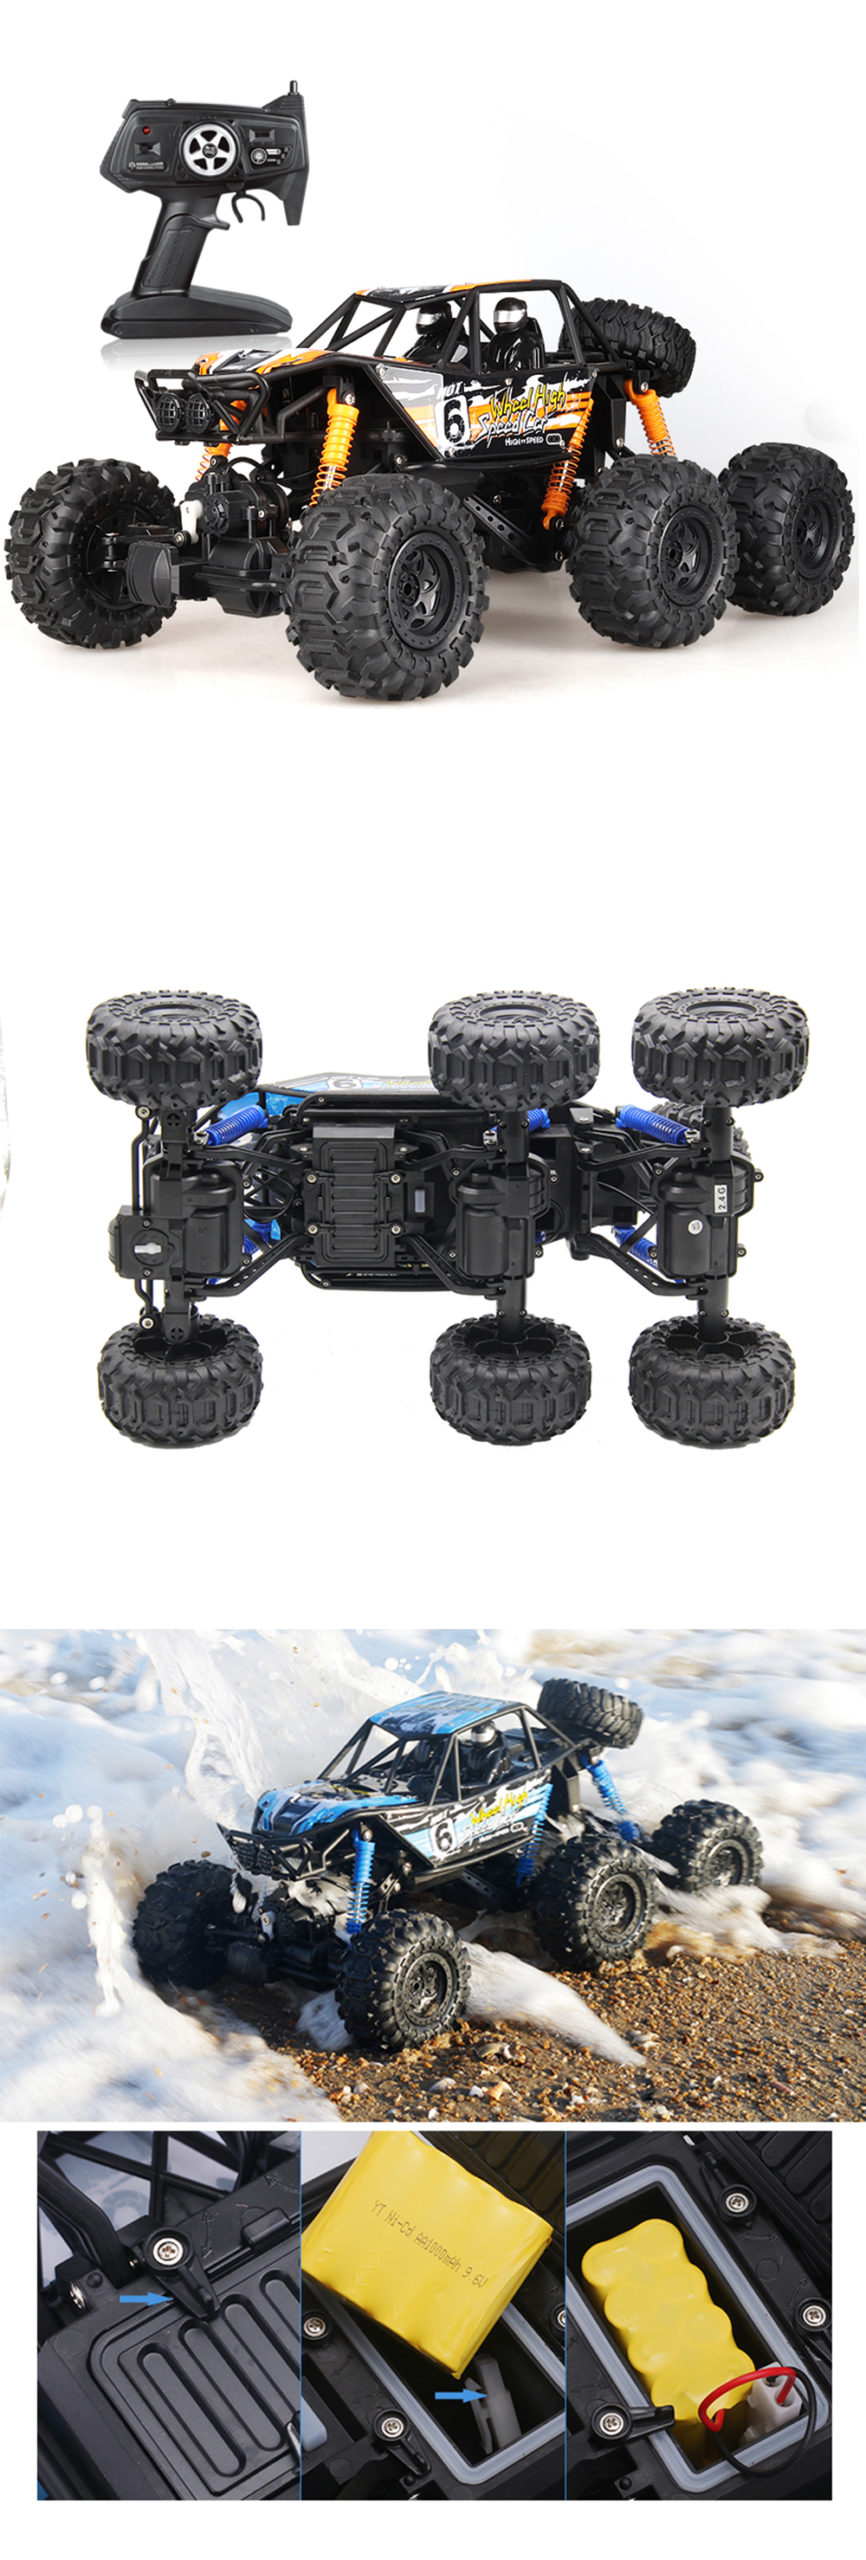 RC Waterproof Climbing Car 2.4G Scale 1:8 Remote Control Vehicle - Climbing Truck - 2